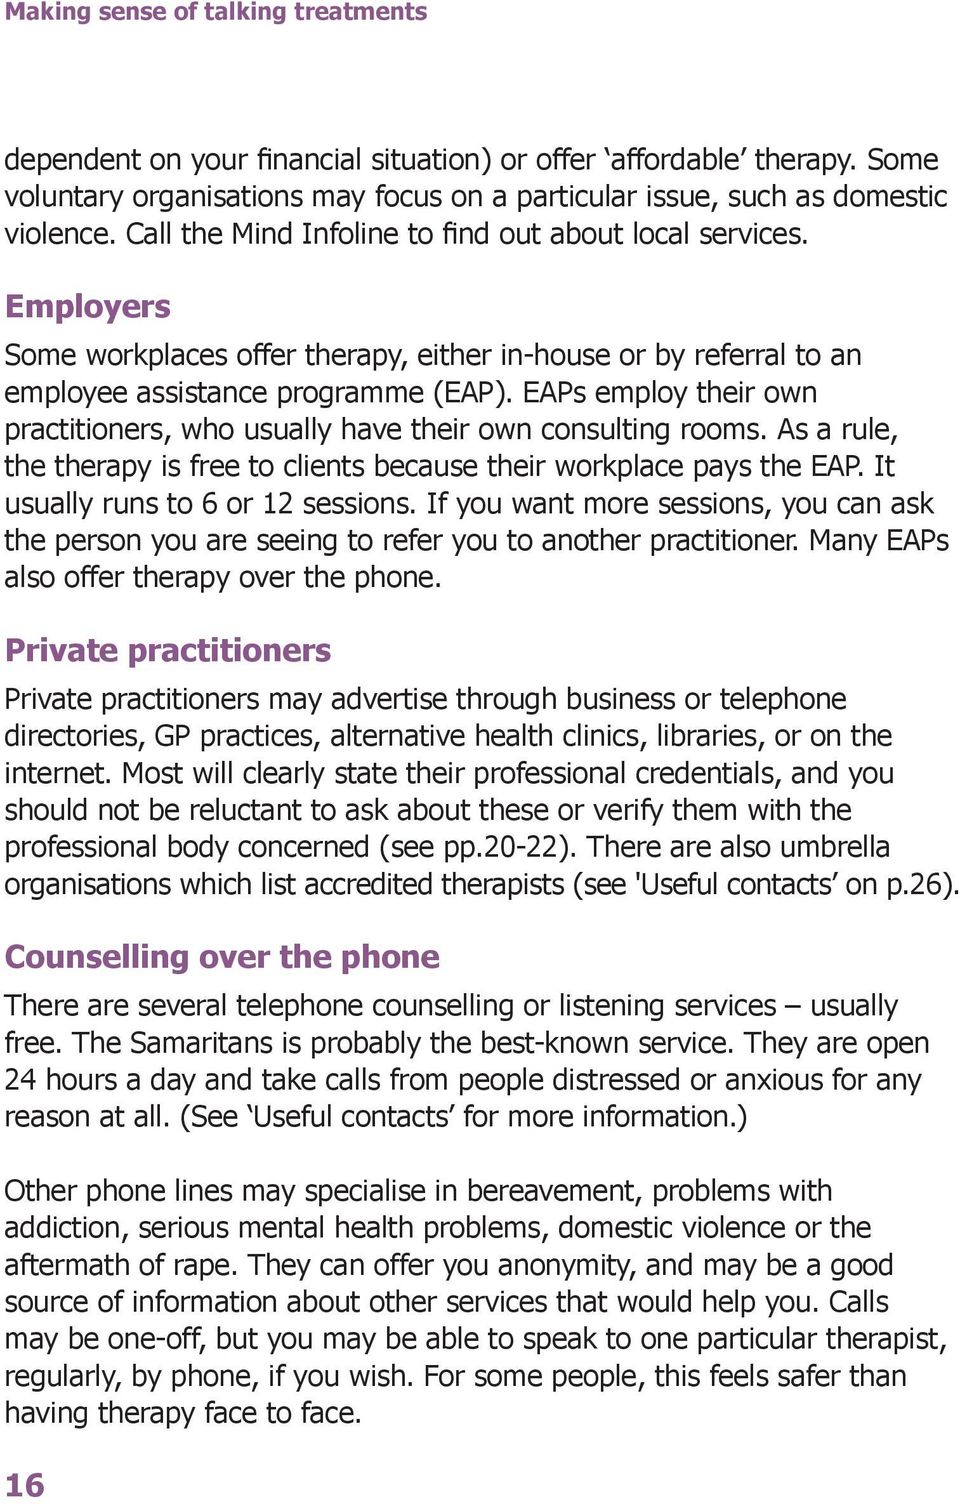 EAPs employ their own practitioners, who usually have their own consulting rooms. As a rule, the therapy is free to clients because their workplace pays the EAP. It usually runs to 6 or 12 sessions.